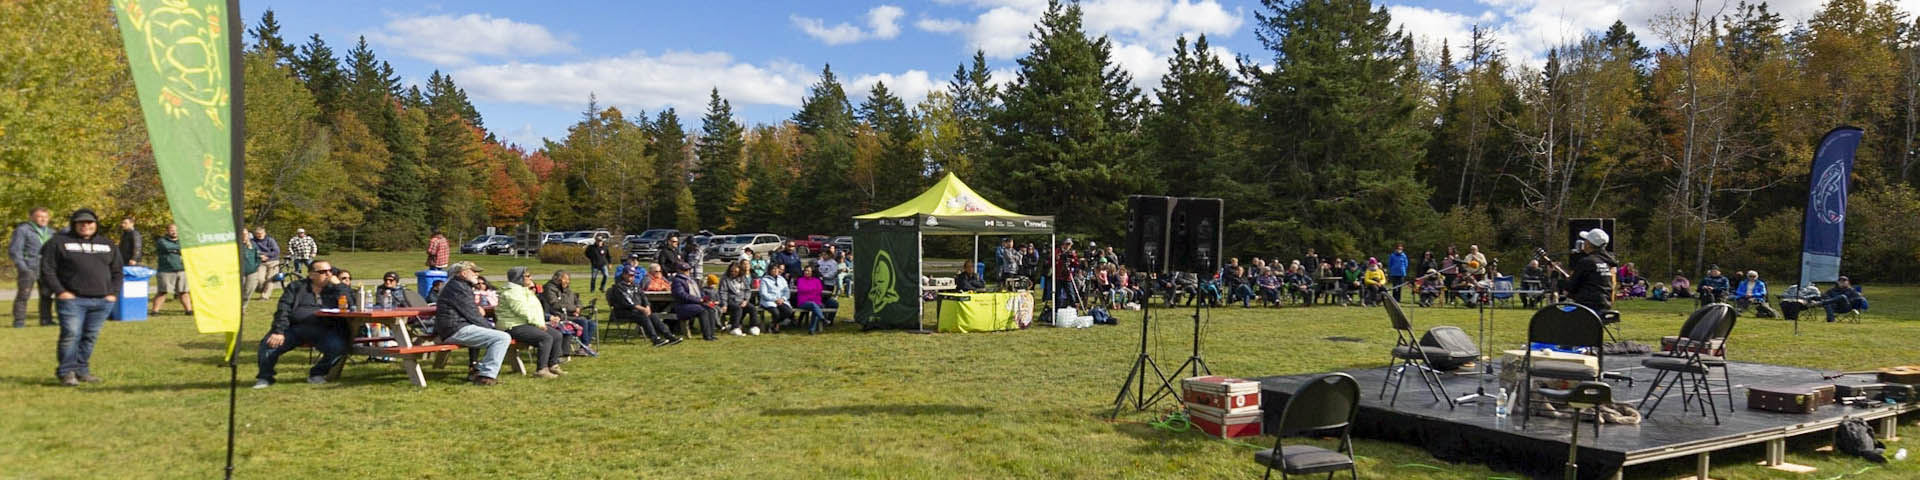 A musician performs in front of a crowd at La Source in Kouchibouguac National Park